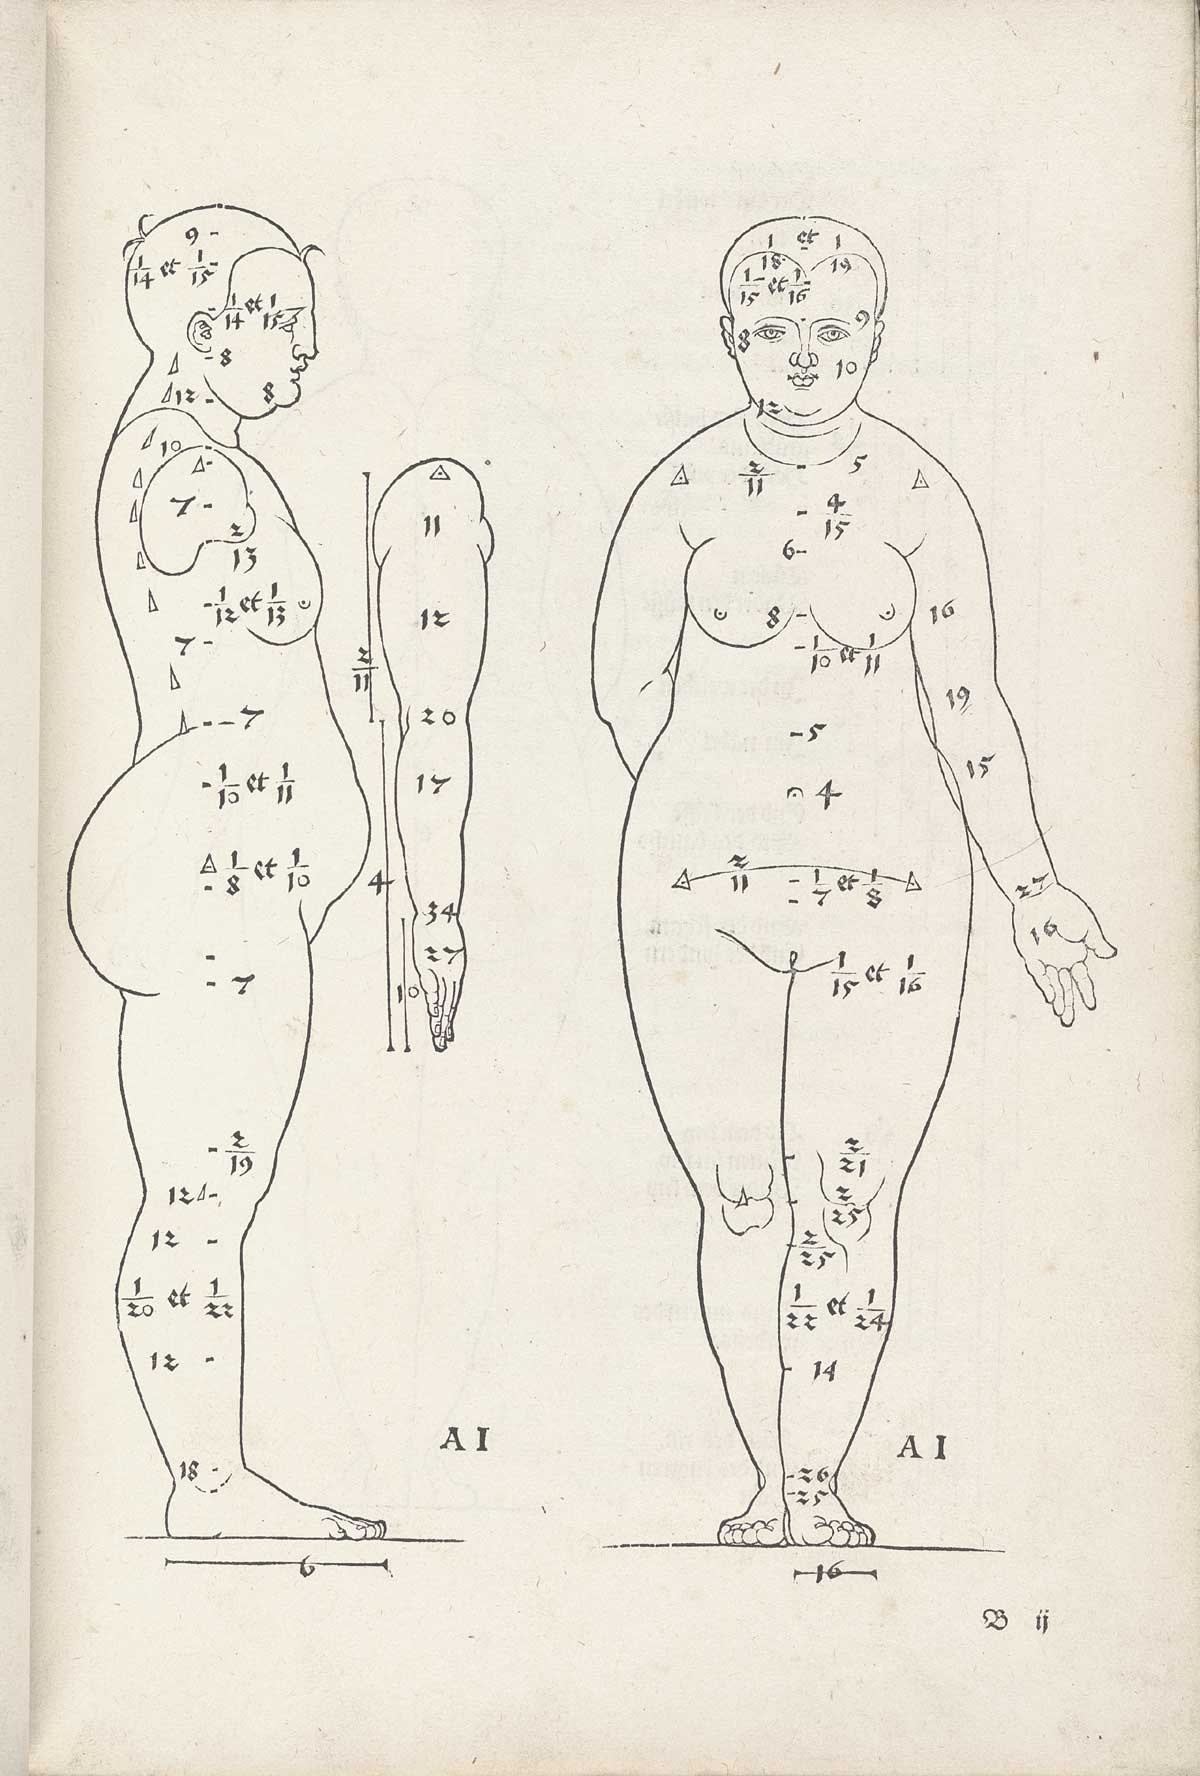 Woodcut image of two standing nude female figures, the one on the right facing the viewer and the one on the left in profile facing to the right, both with index letters showing proportions, for instance from the bottom of the chin to the top of the shoulder, from Albrecht Dürer’s Vier Bücher von menschlicher Proportion, NLM Call no. WZ 240 D853v 1528.